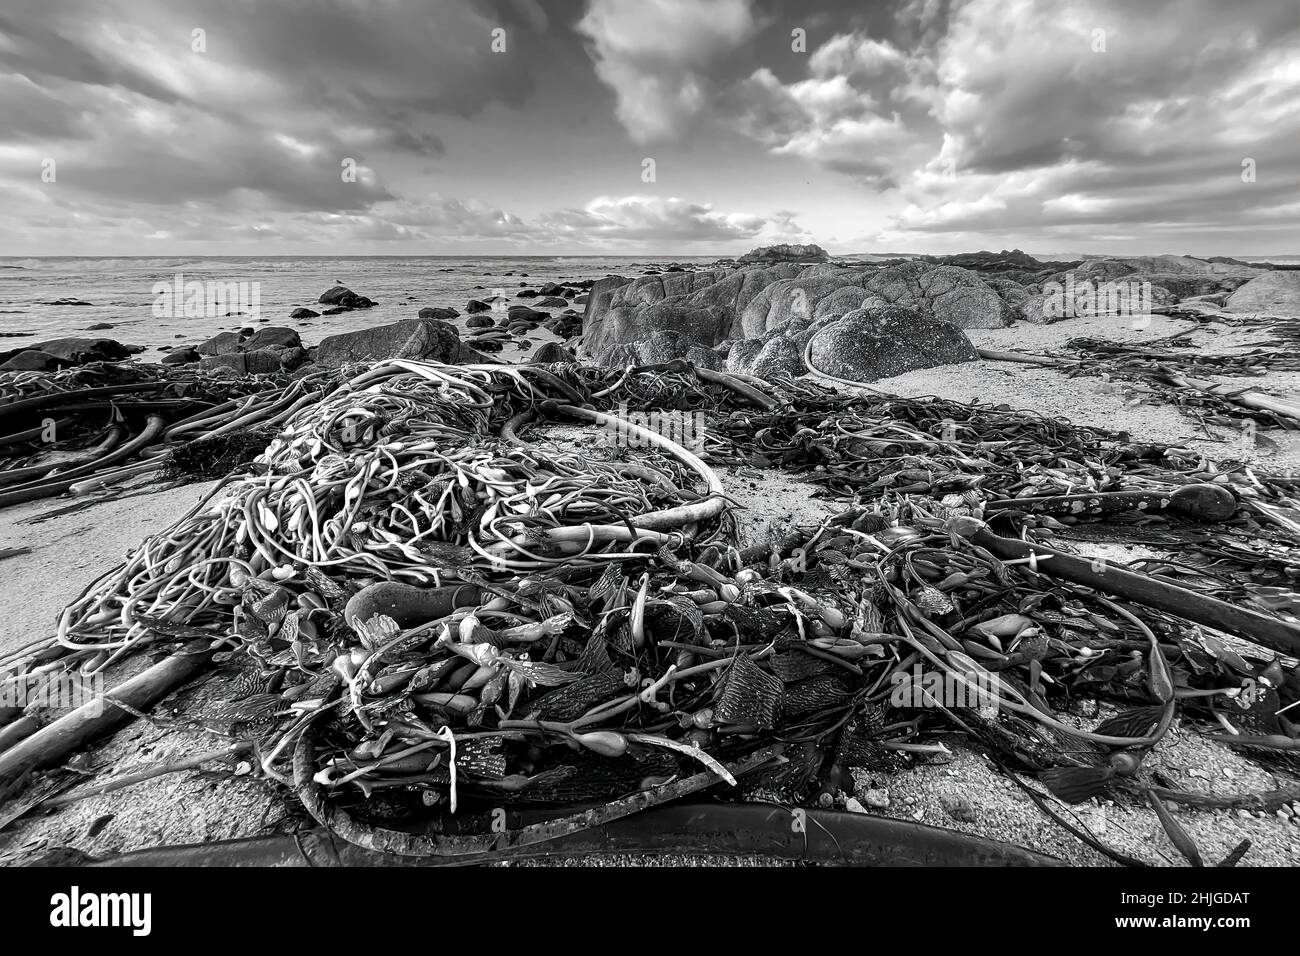 Piles of kelp resulting from warmer water/climate change and storms on beach below dramatic clouds at California's Asilomar Beach. Stock Photo